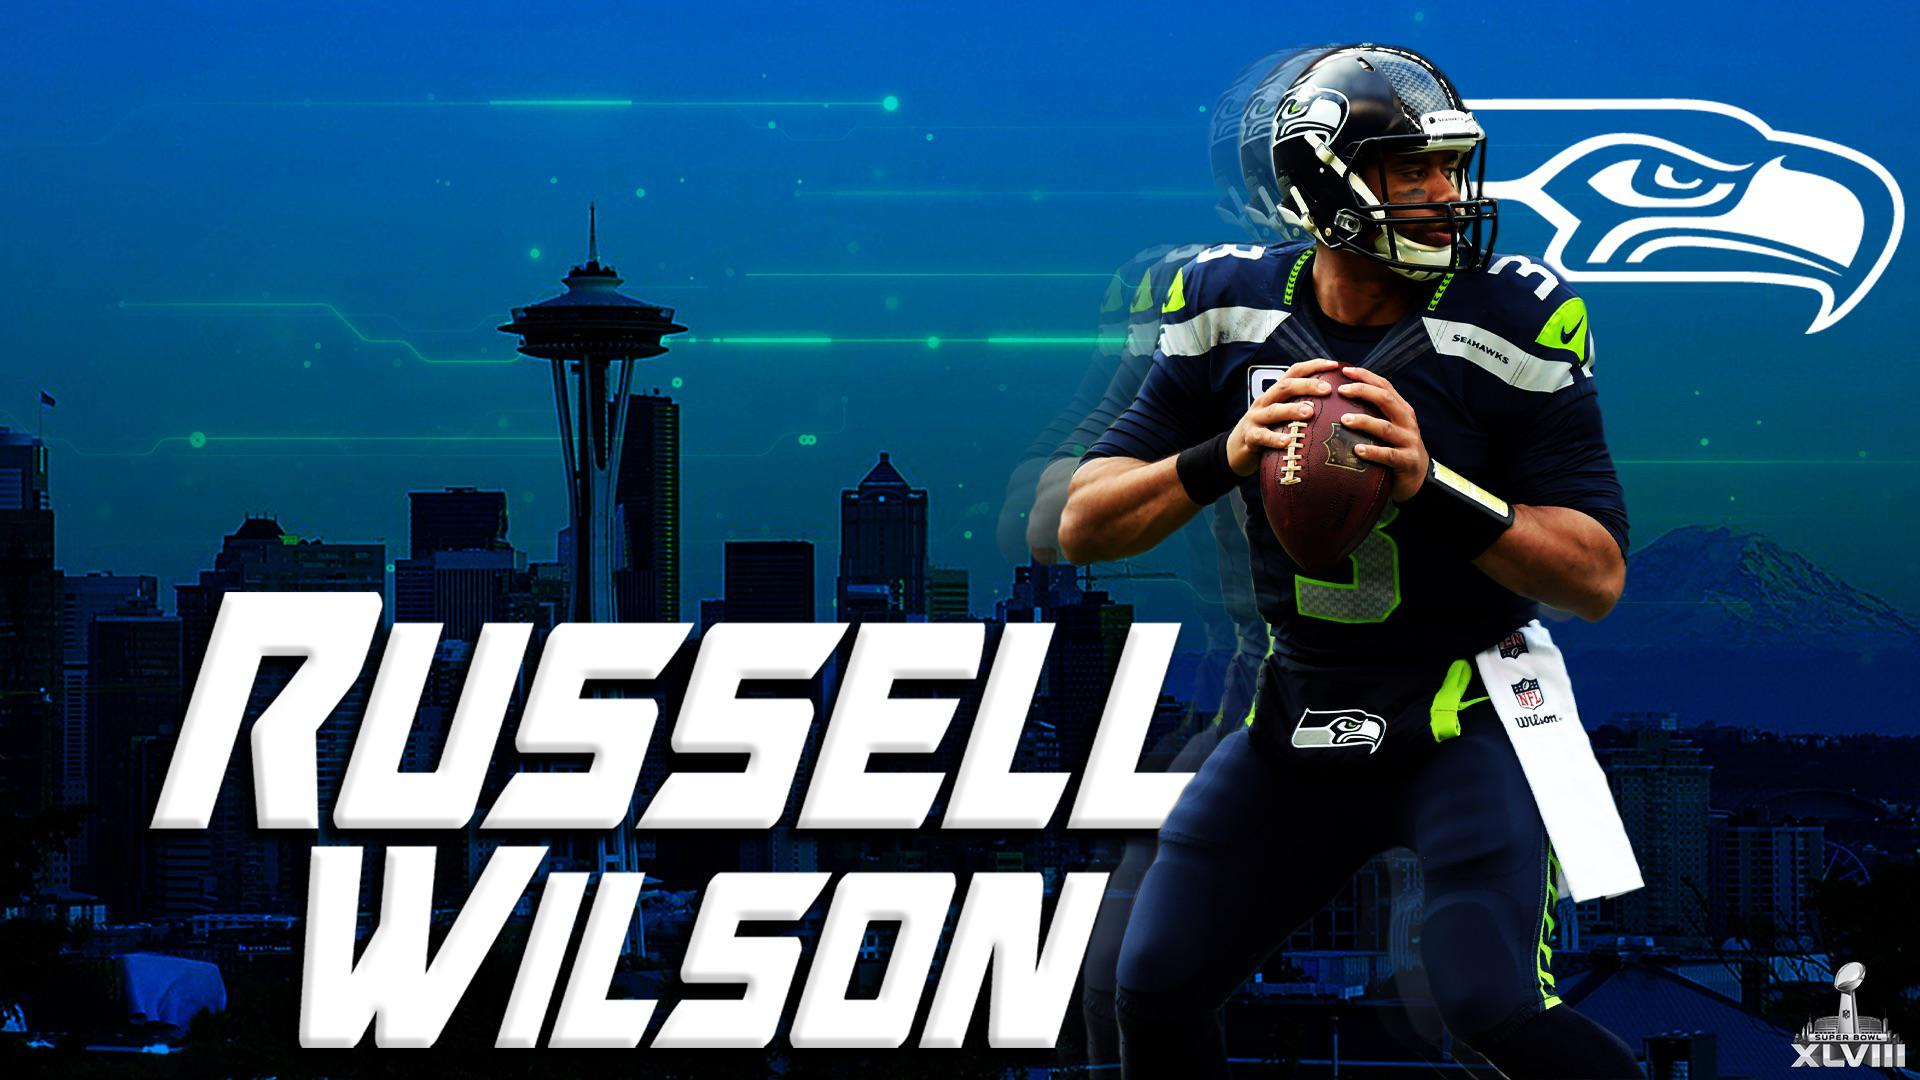 1920x1080 Hello all, I'm going around to all NFL teams and making player backgrounds/ wallpapers ( resolution). Hope you enjoy this Russell Wilson background I made, if you would like to see other players